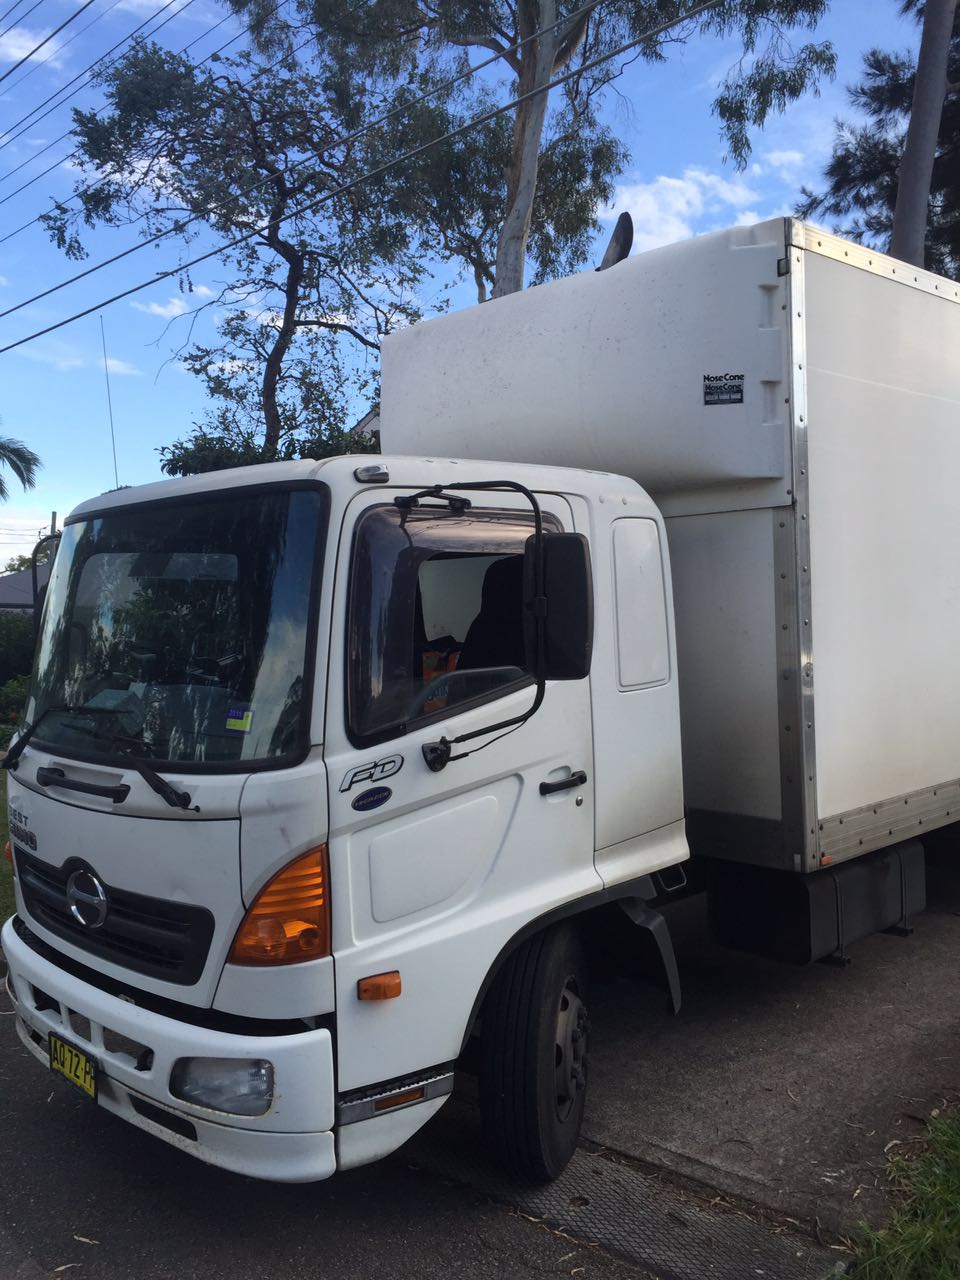 AAA Holden Removals Removalists - Moving House & Moving Home Pro | moving company | 35 Vore Street, Silverwater, Sydney NSW 2128, Australia | 0404606555 OR +61 404 606 555